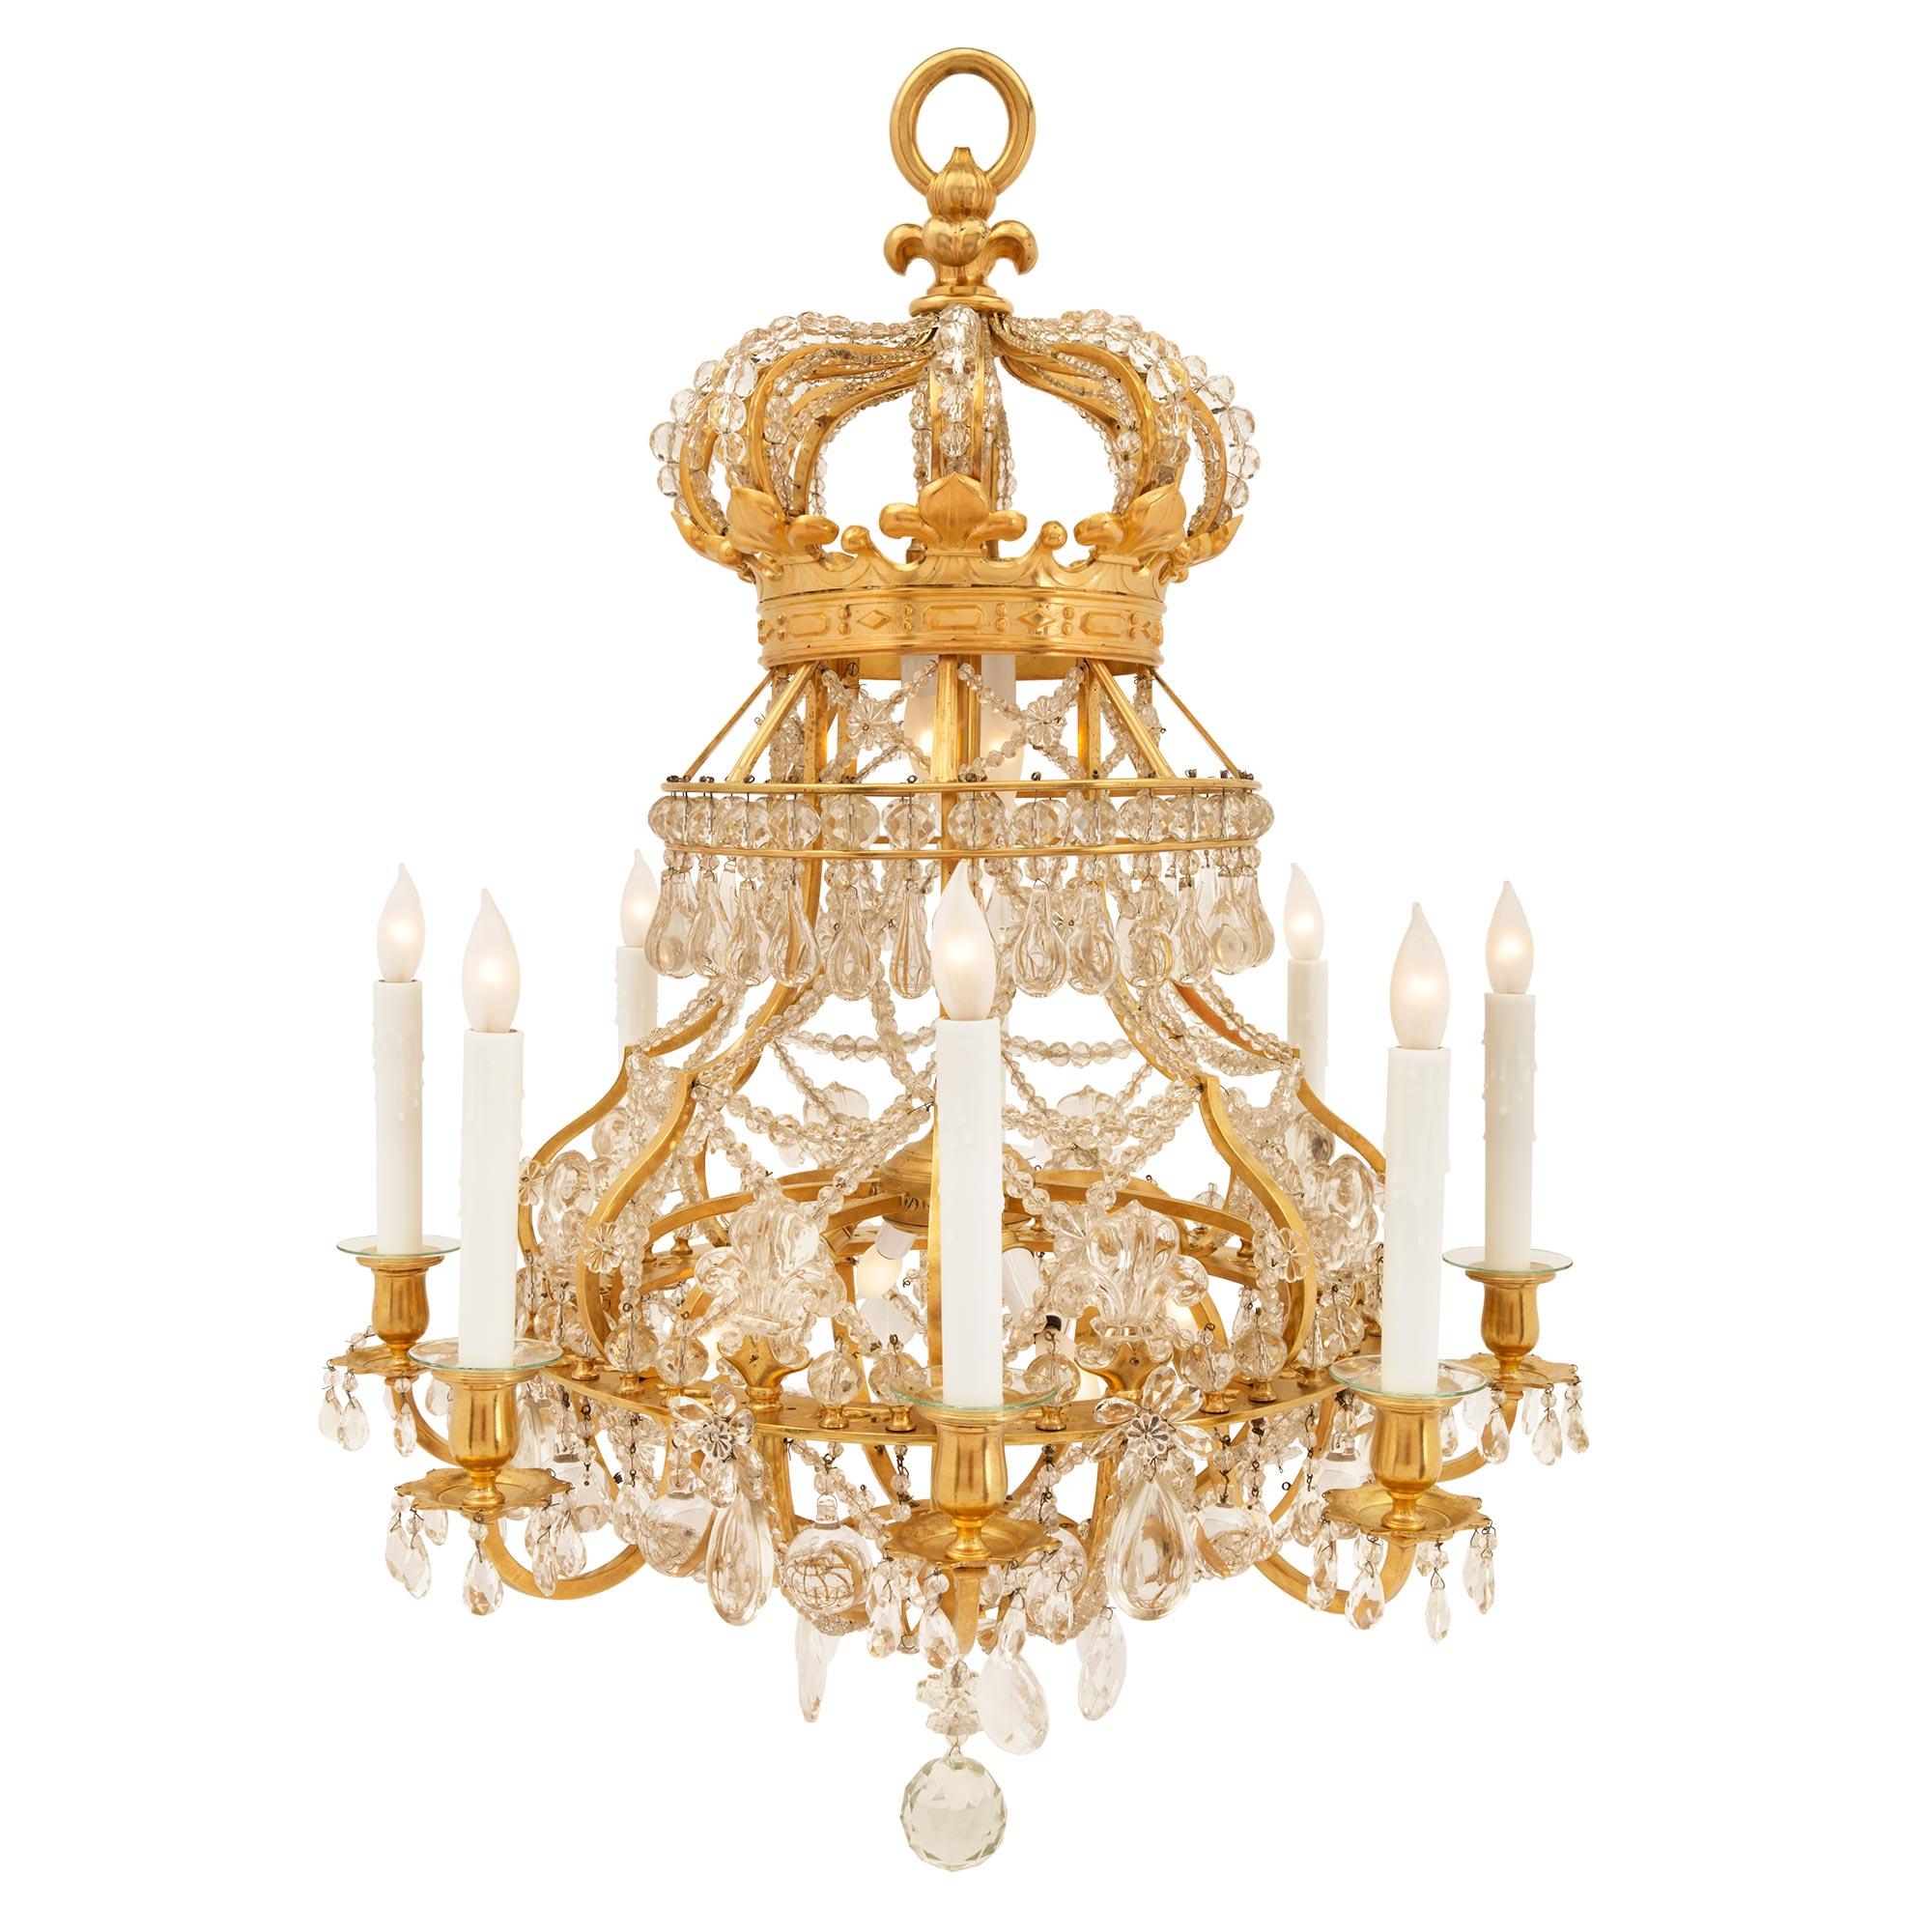 A sensational French 19th century Louis XIV st. ormolu, crystal and beaded glass eight arm fourteen light chandelier after a royal model. The chandelier is centered by a beautiful solid cut crystal ball pendant amidst lovely cut crystal pendants.